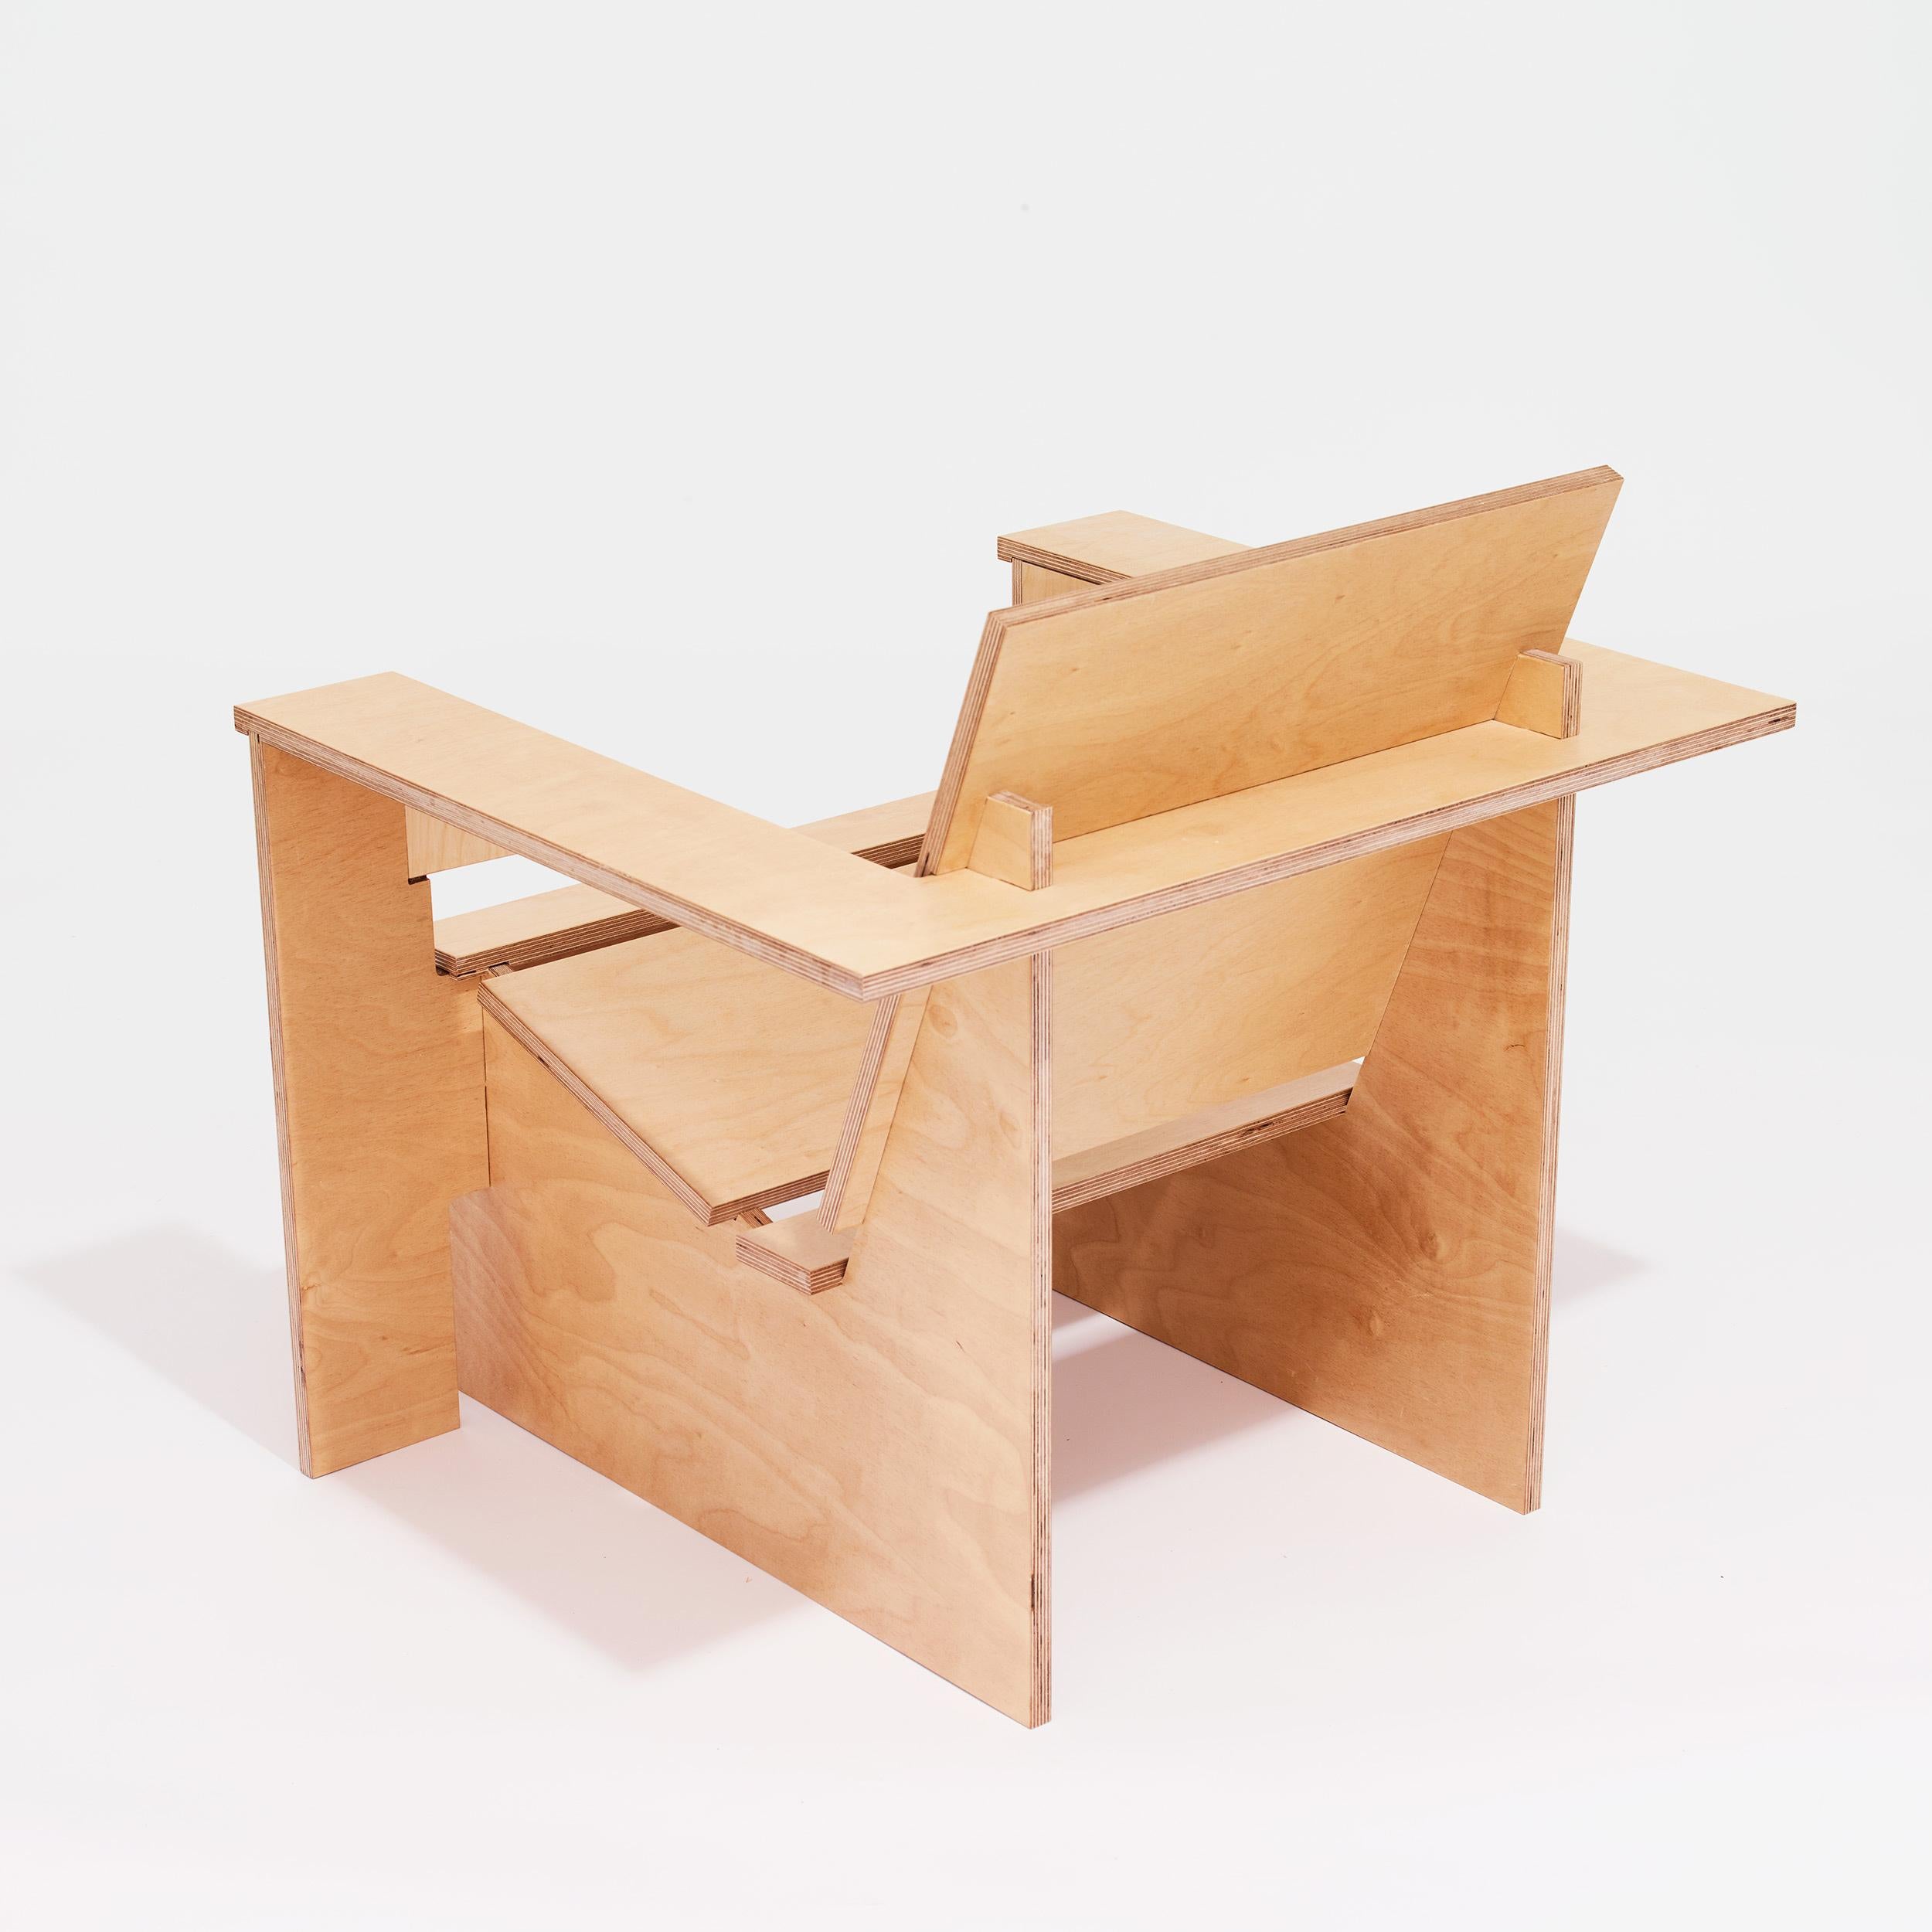 American Plywood, Zero-Waste, Body-Fit, Durable, Upstate New York-Made Lounge Chair